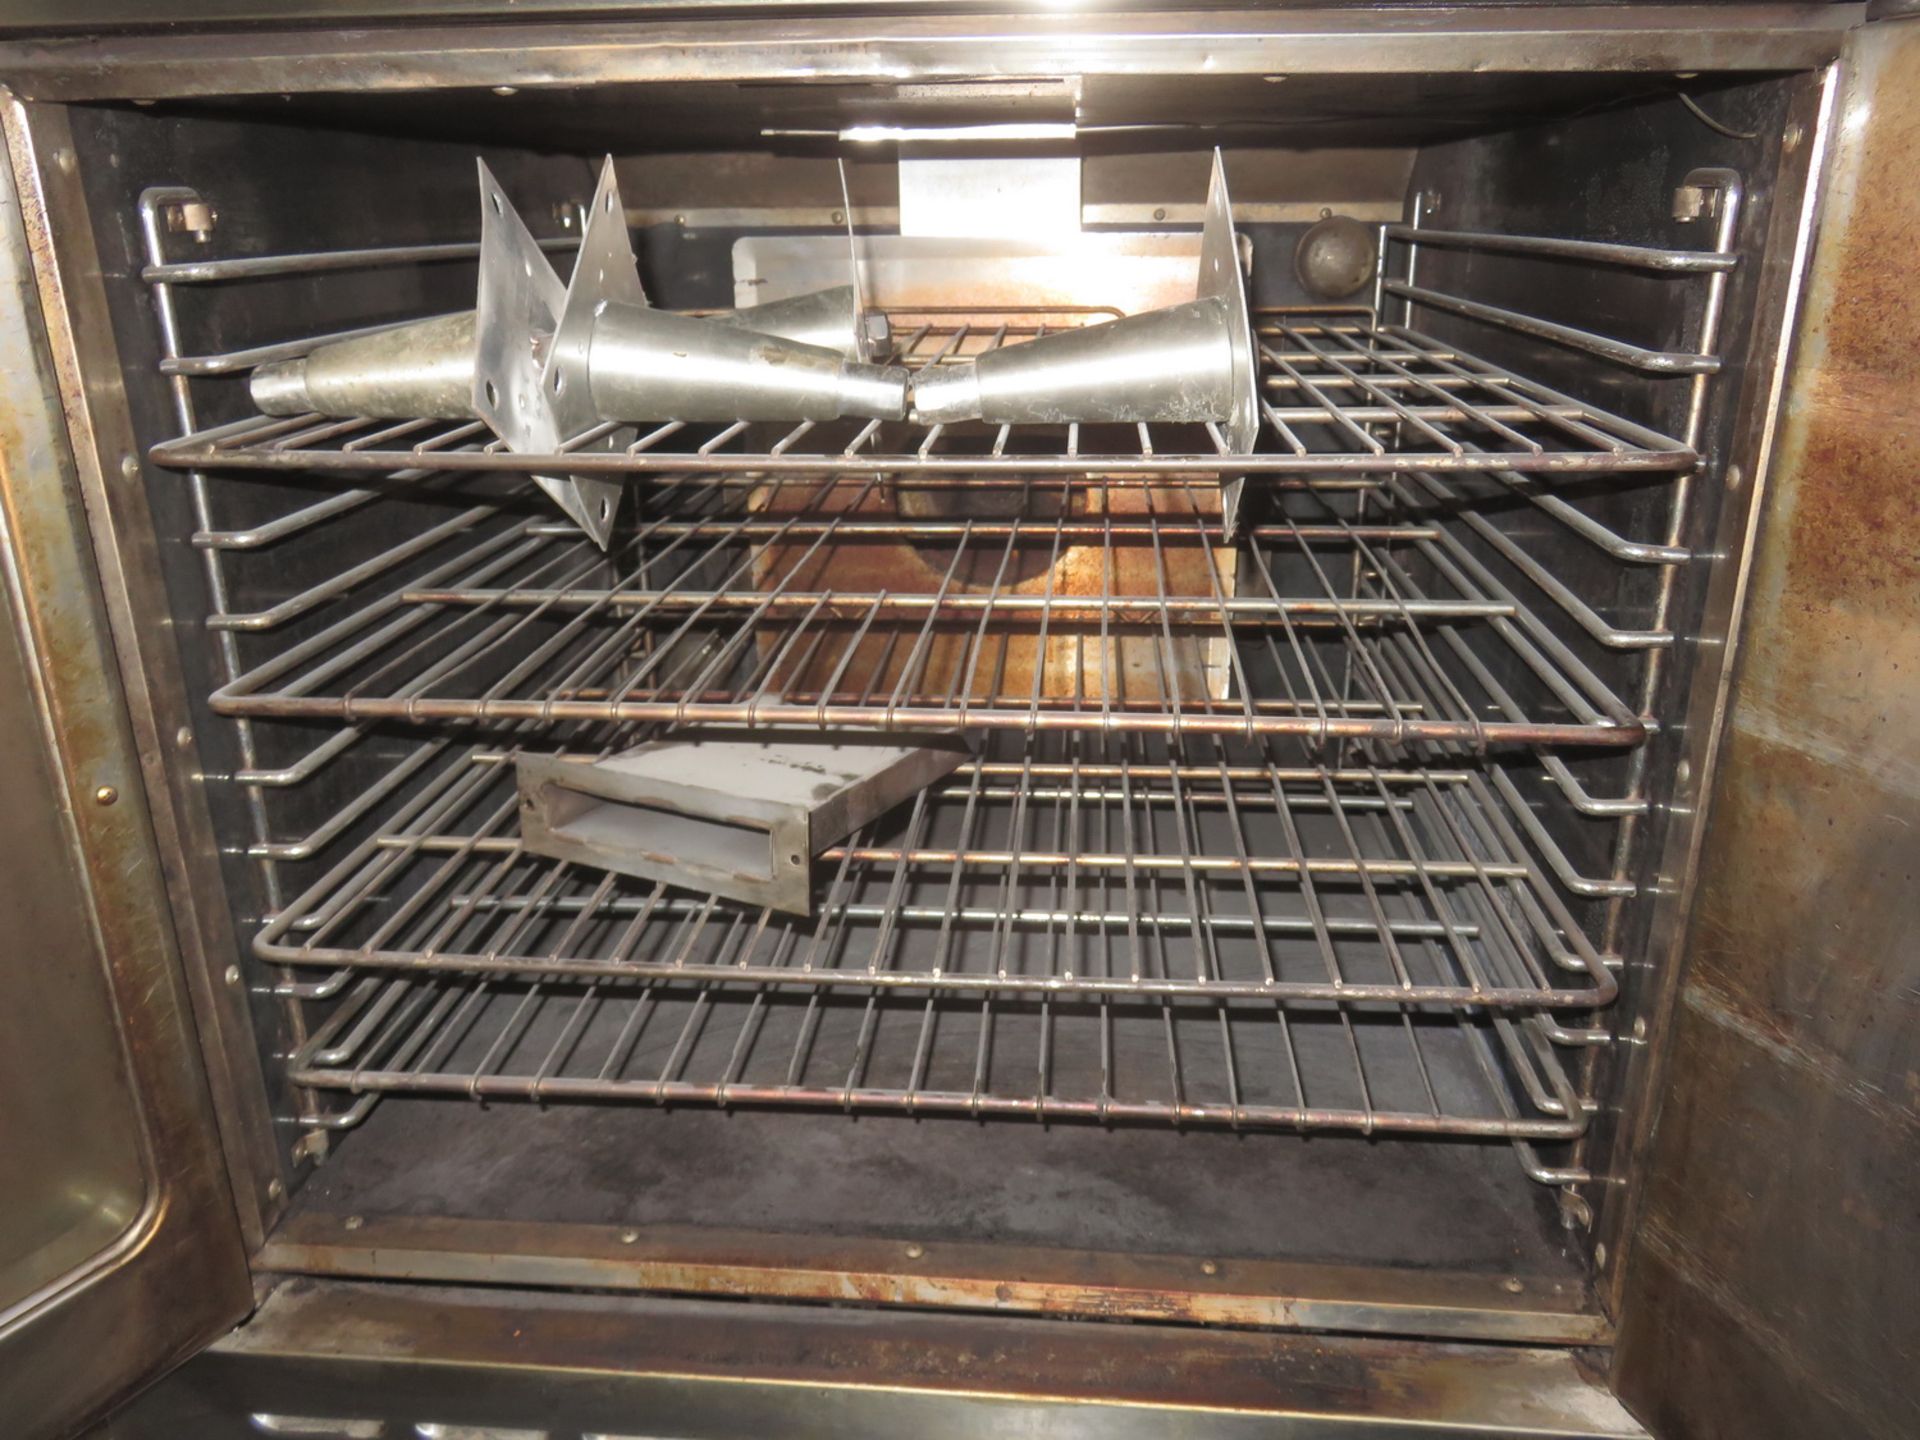 TRI-STAR SINGLE GAS CONVECTION OVEN - Image 2 of 2